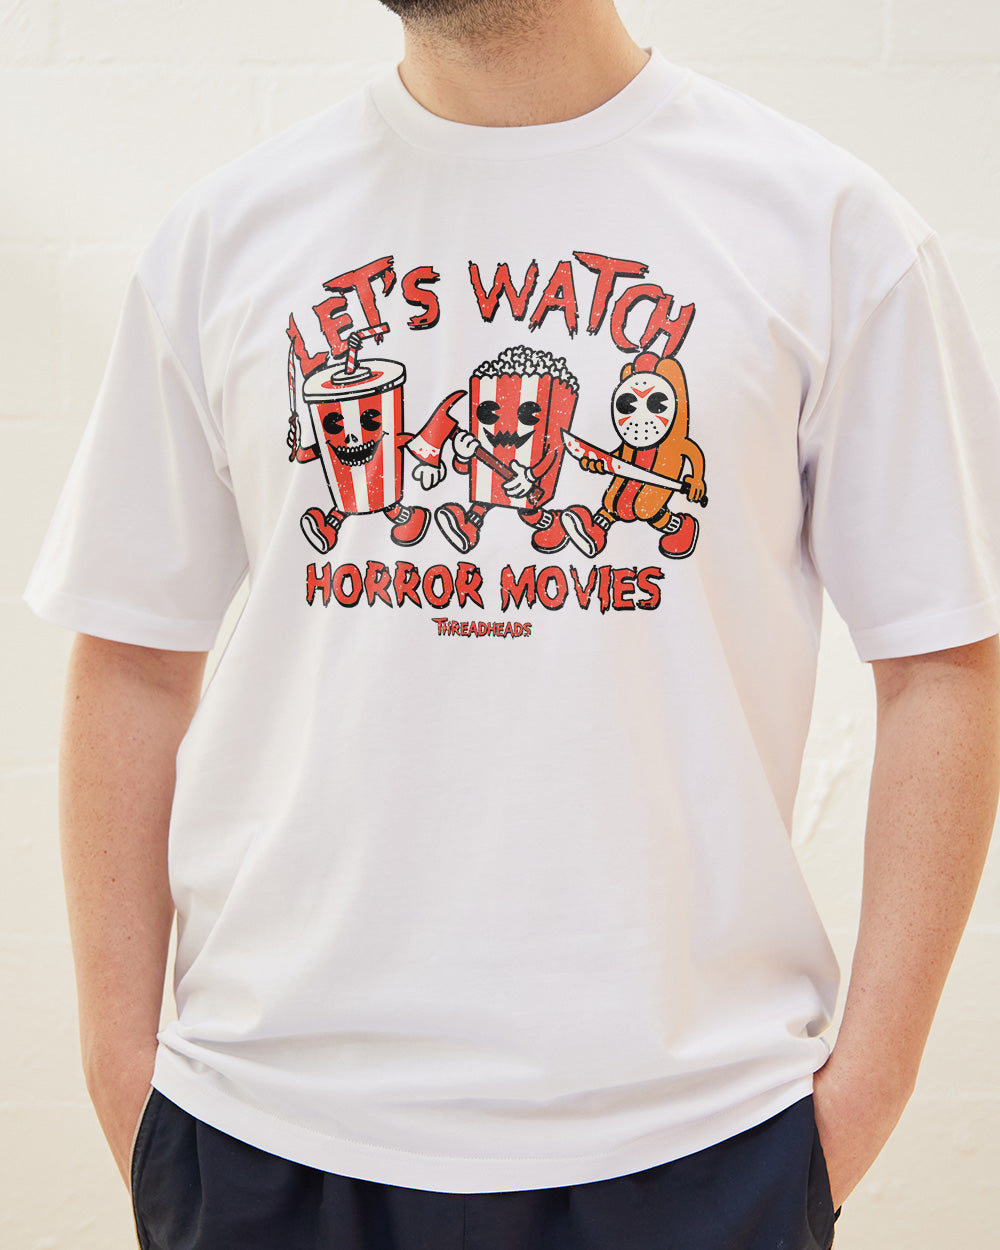 Let's Watch Horror Movies T-Shirt Europe Online White